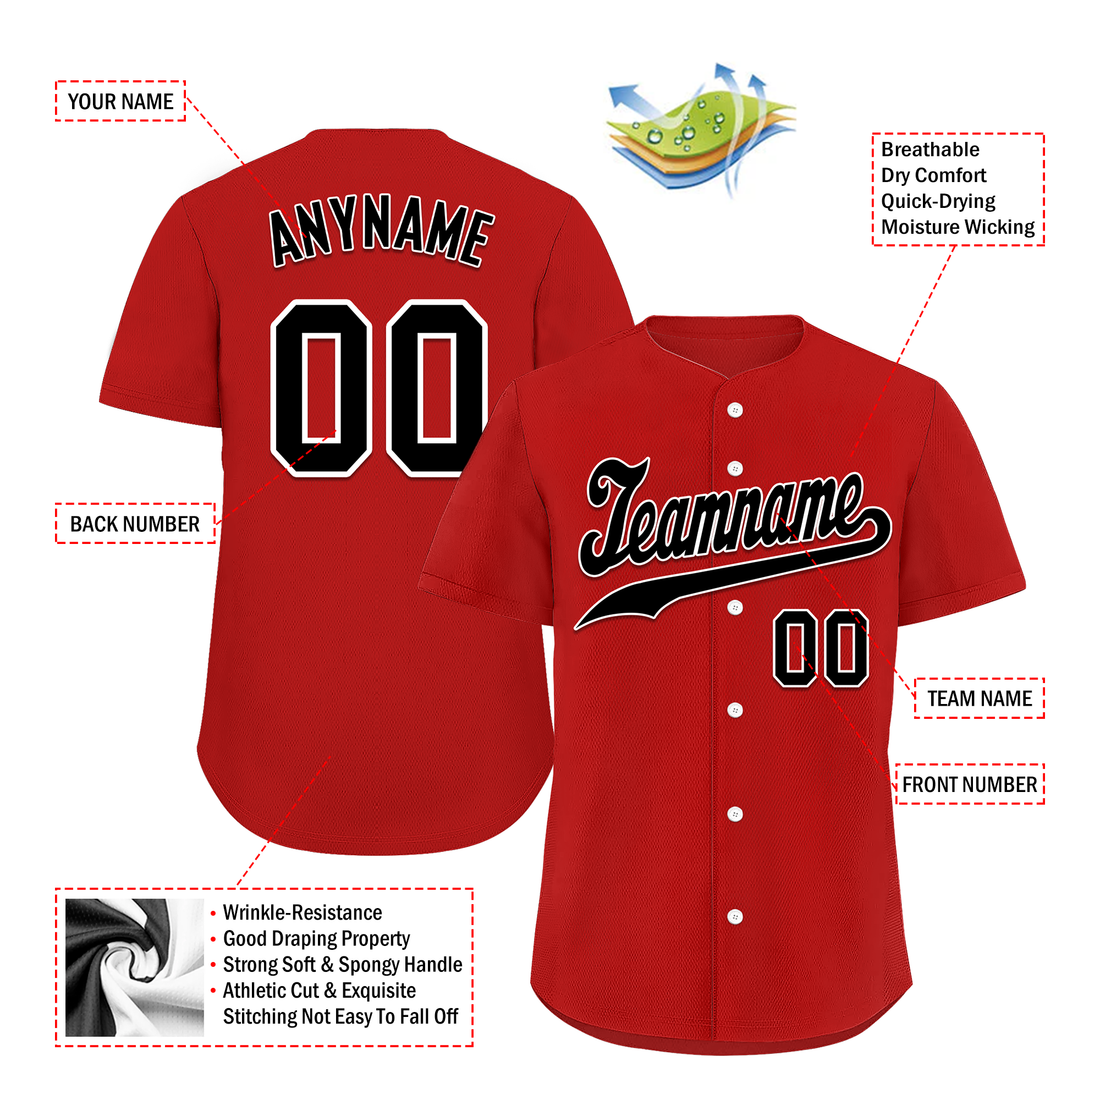 Custom Red Classic Style Black Personalized Authentic Baseball Jersey BSBJ01-bd0fa09